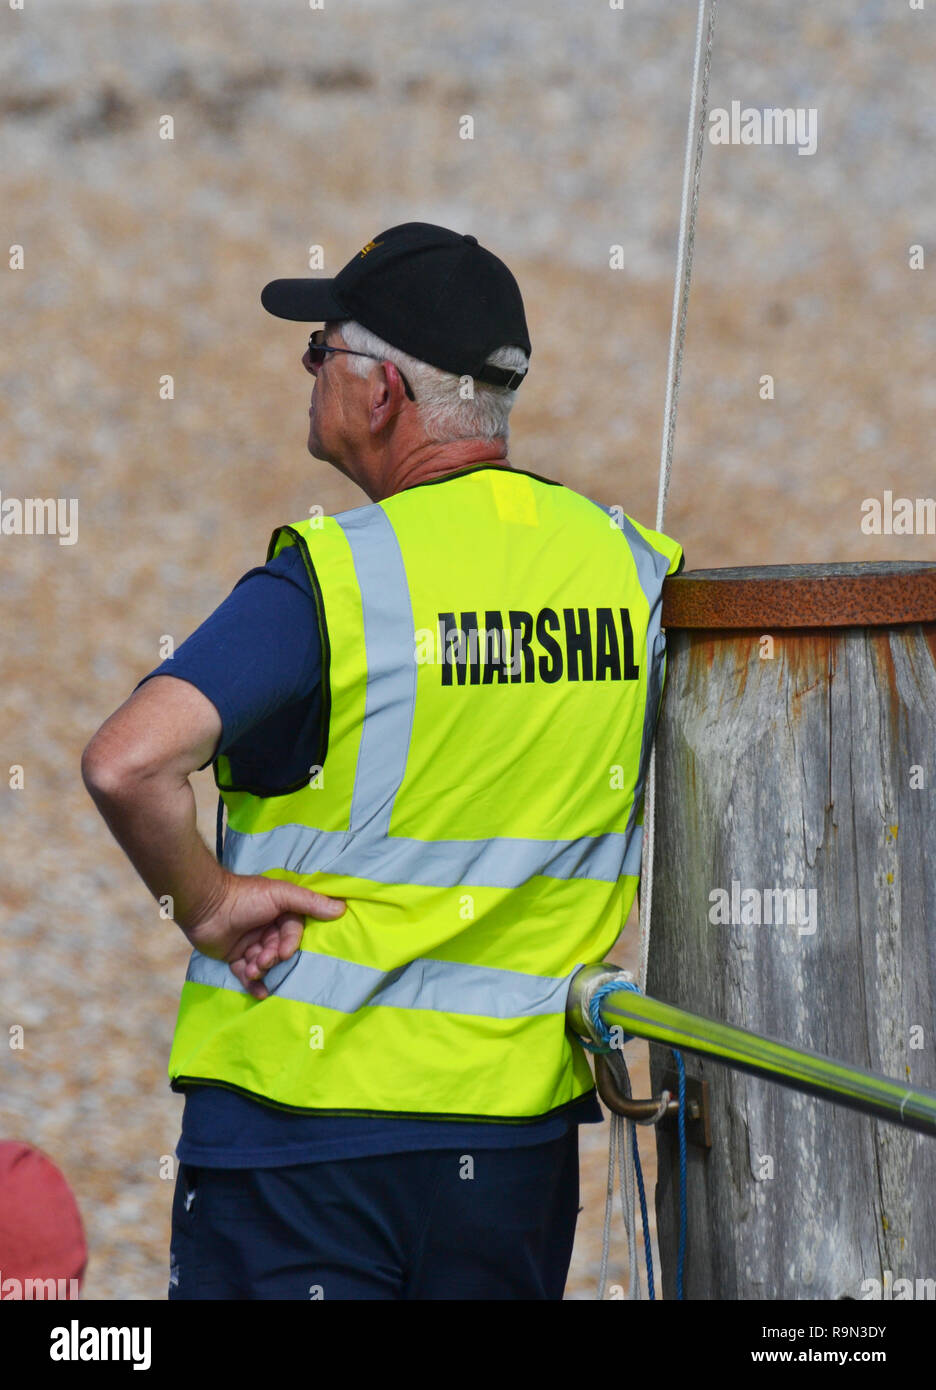 Marshall a Eastbourne Airbourne Air Show, East Sussex, England, Regno Unito Foto Stock